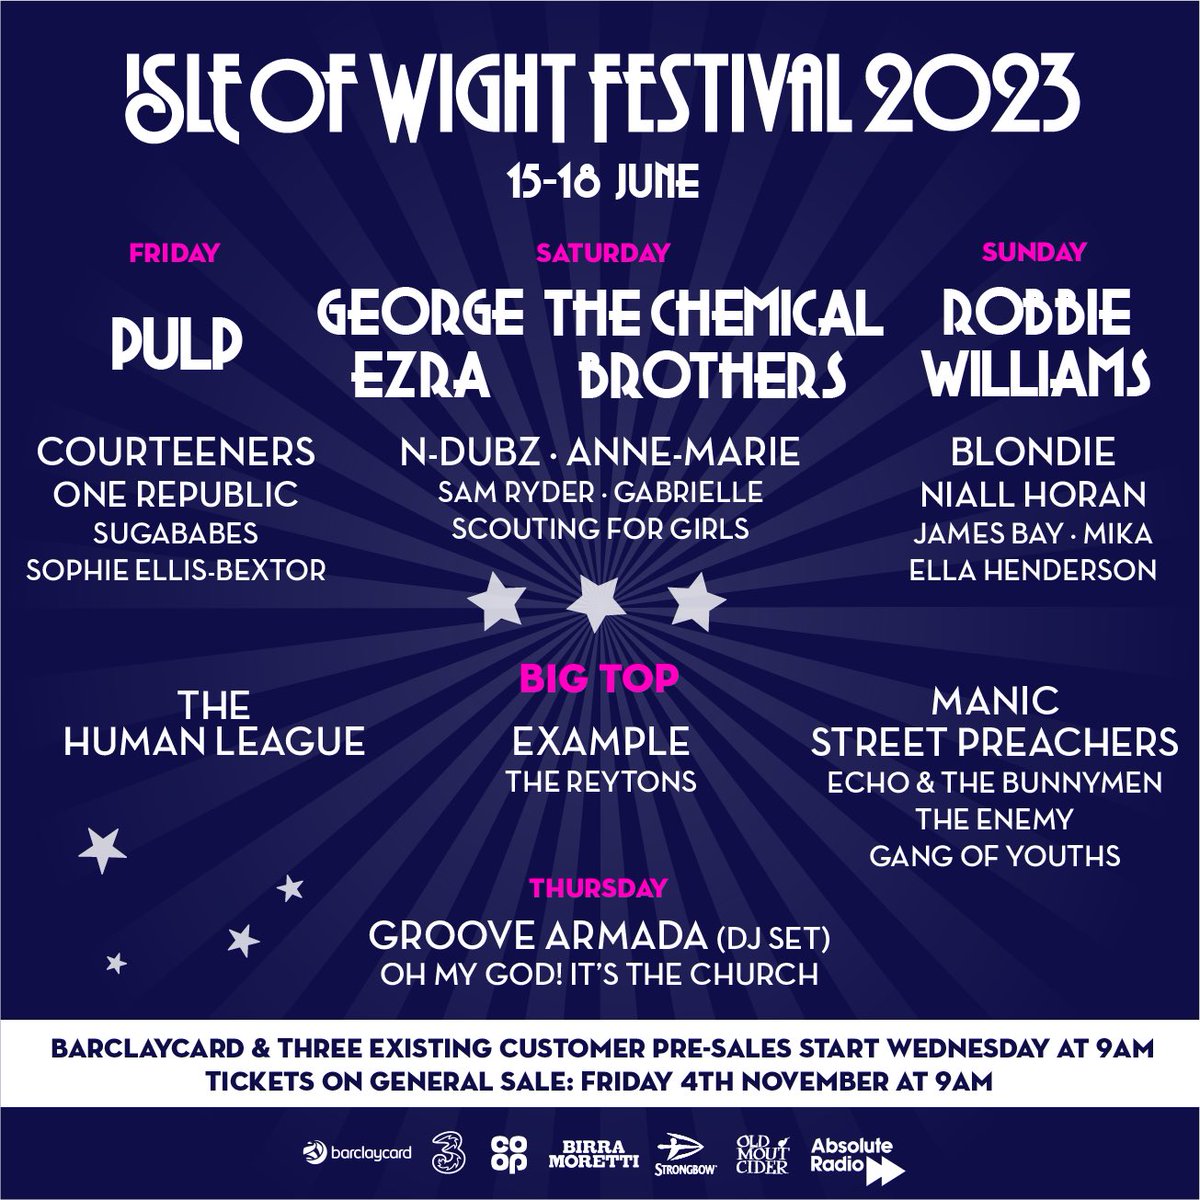 Excited to be playing @IsleOfWightFest for the first time next year ! Tickets on sale Friday isleofwightfestival.com/tickets